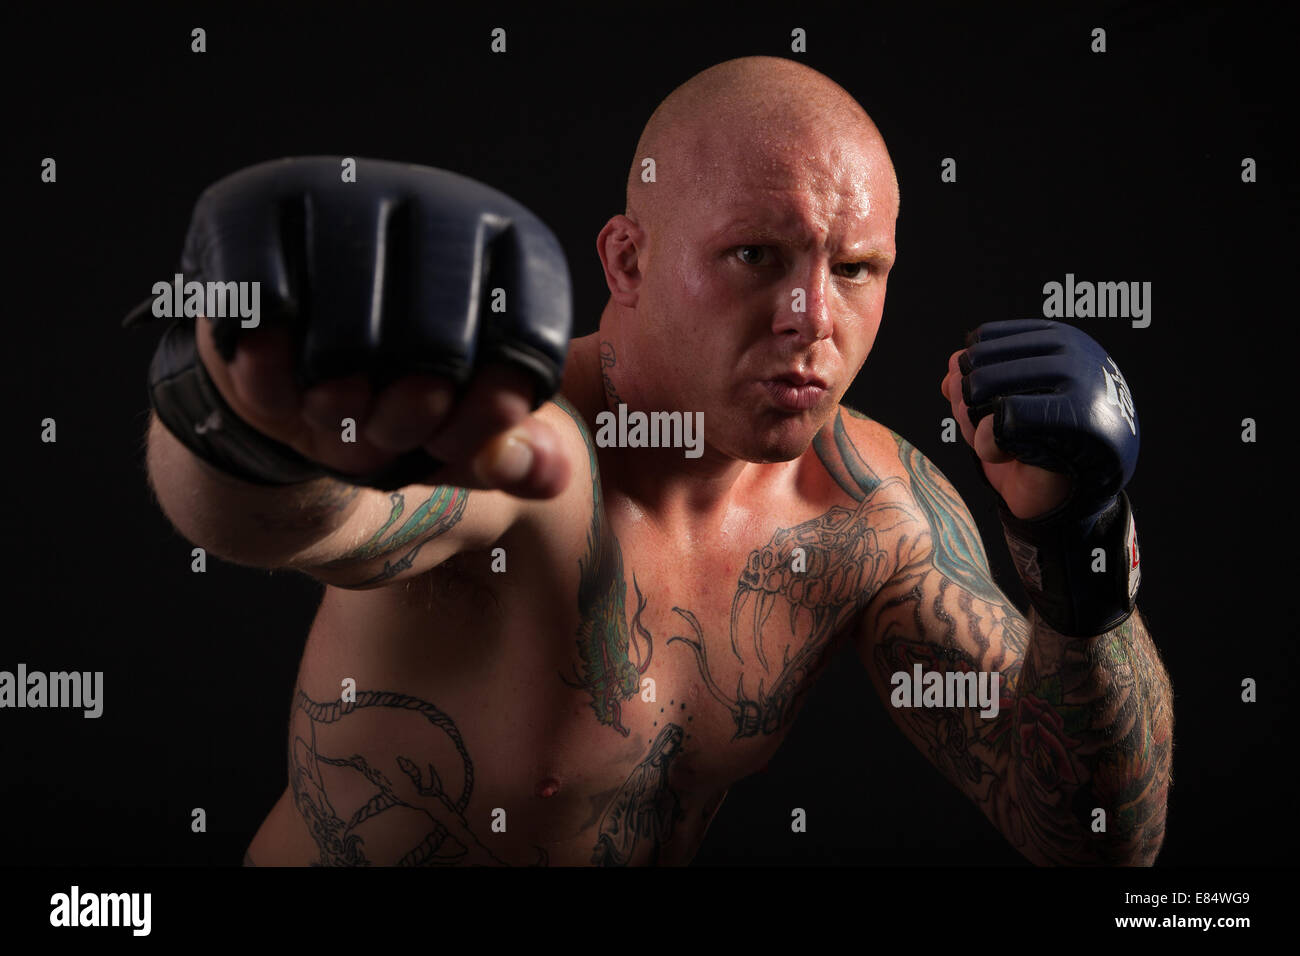 Cage Fighter during work out and warm up. Looking menacingly into camera. Fists in strike pose. Stock Photo